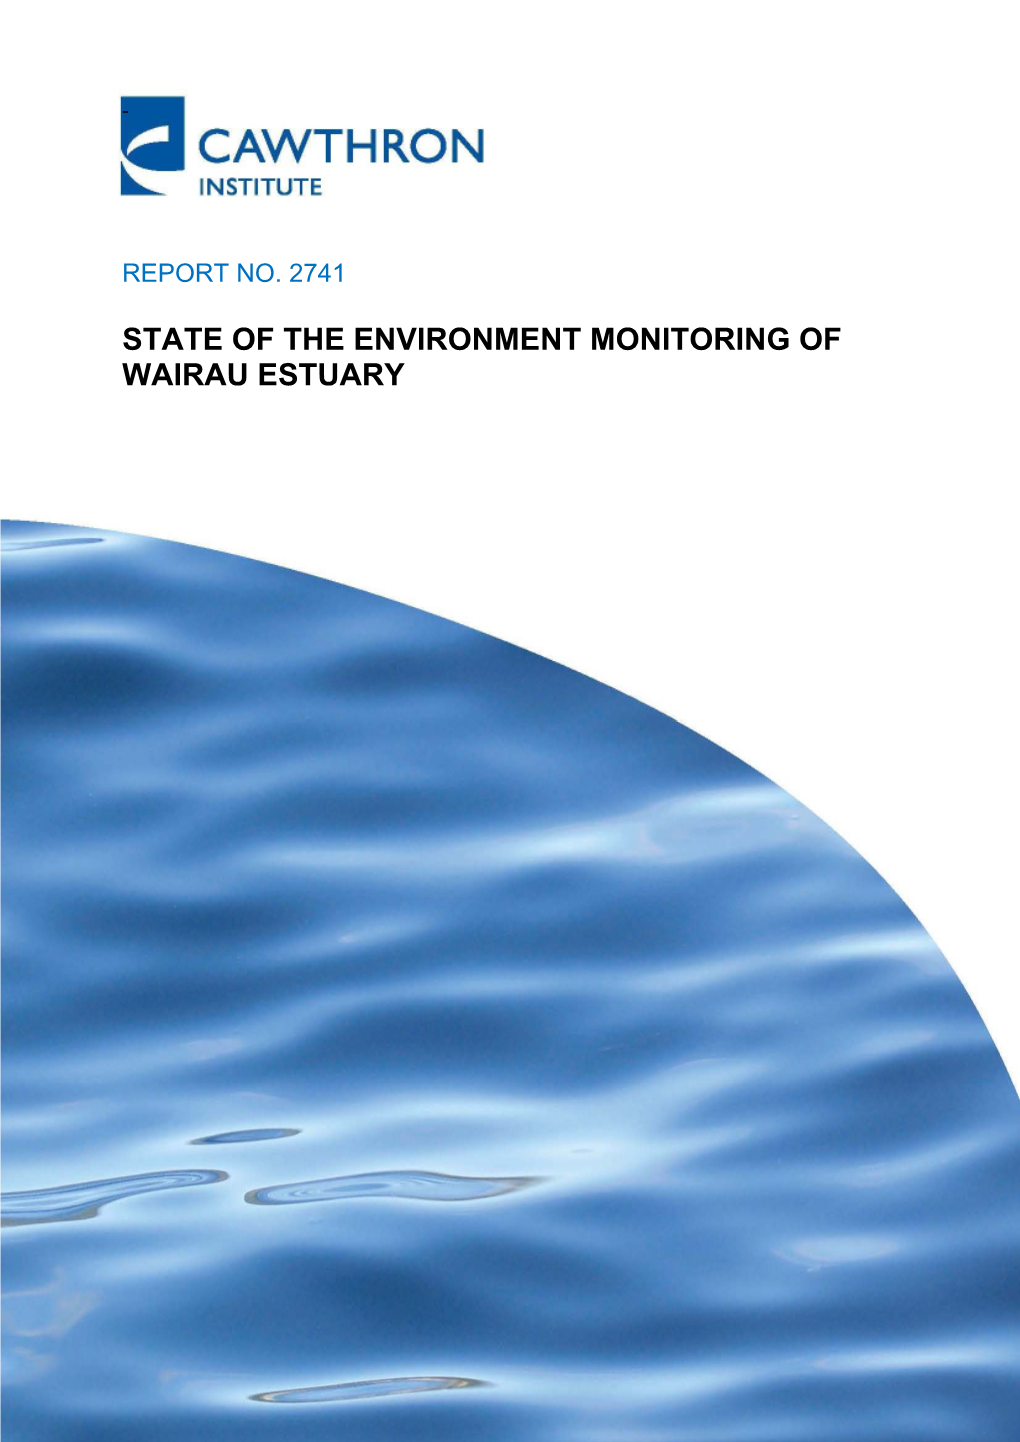 State of the Environment Monitoring of Wairau Estuary